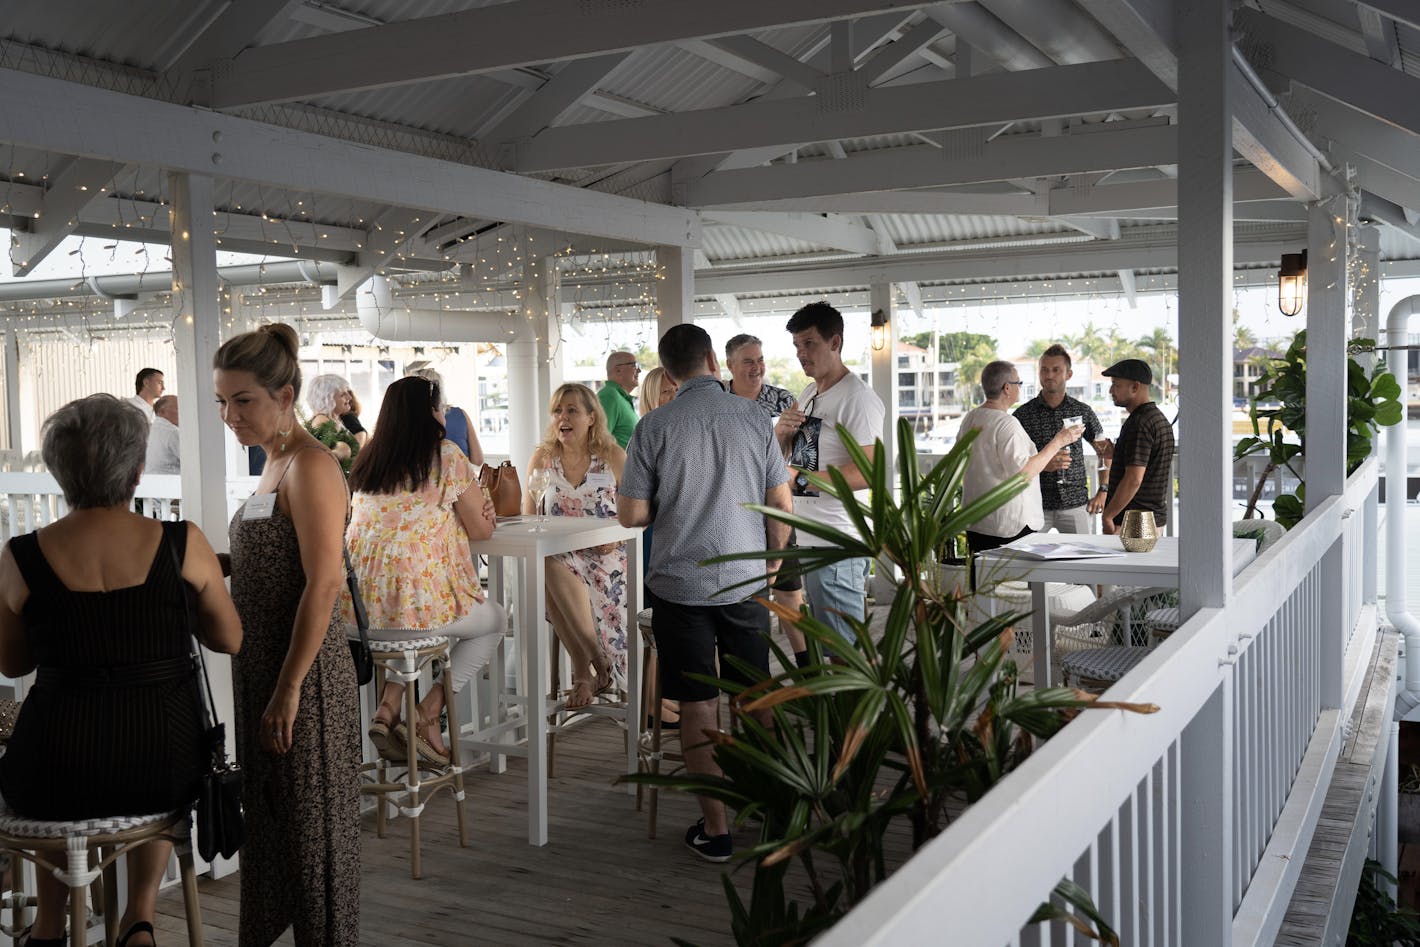 The Terrace - an event space managed by Immersive Events